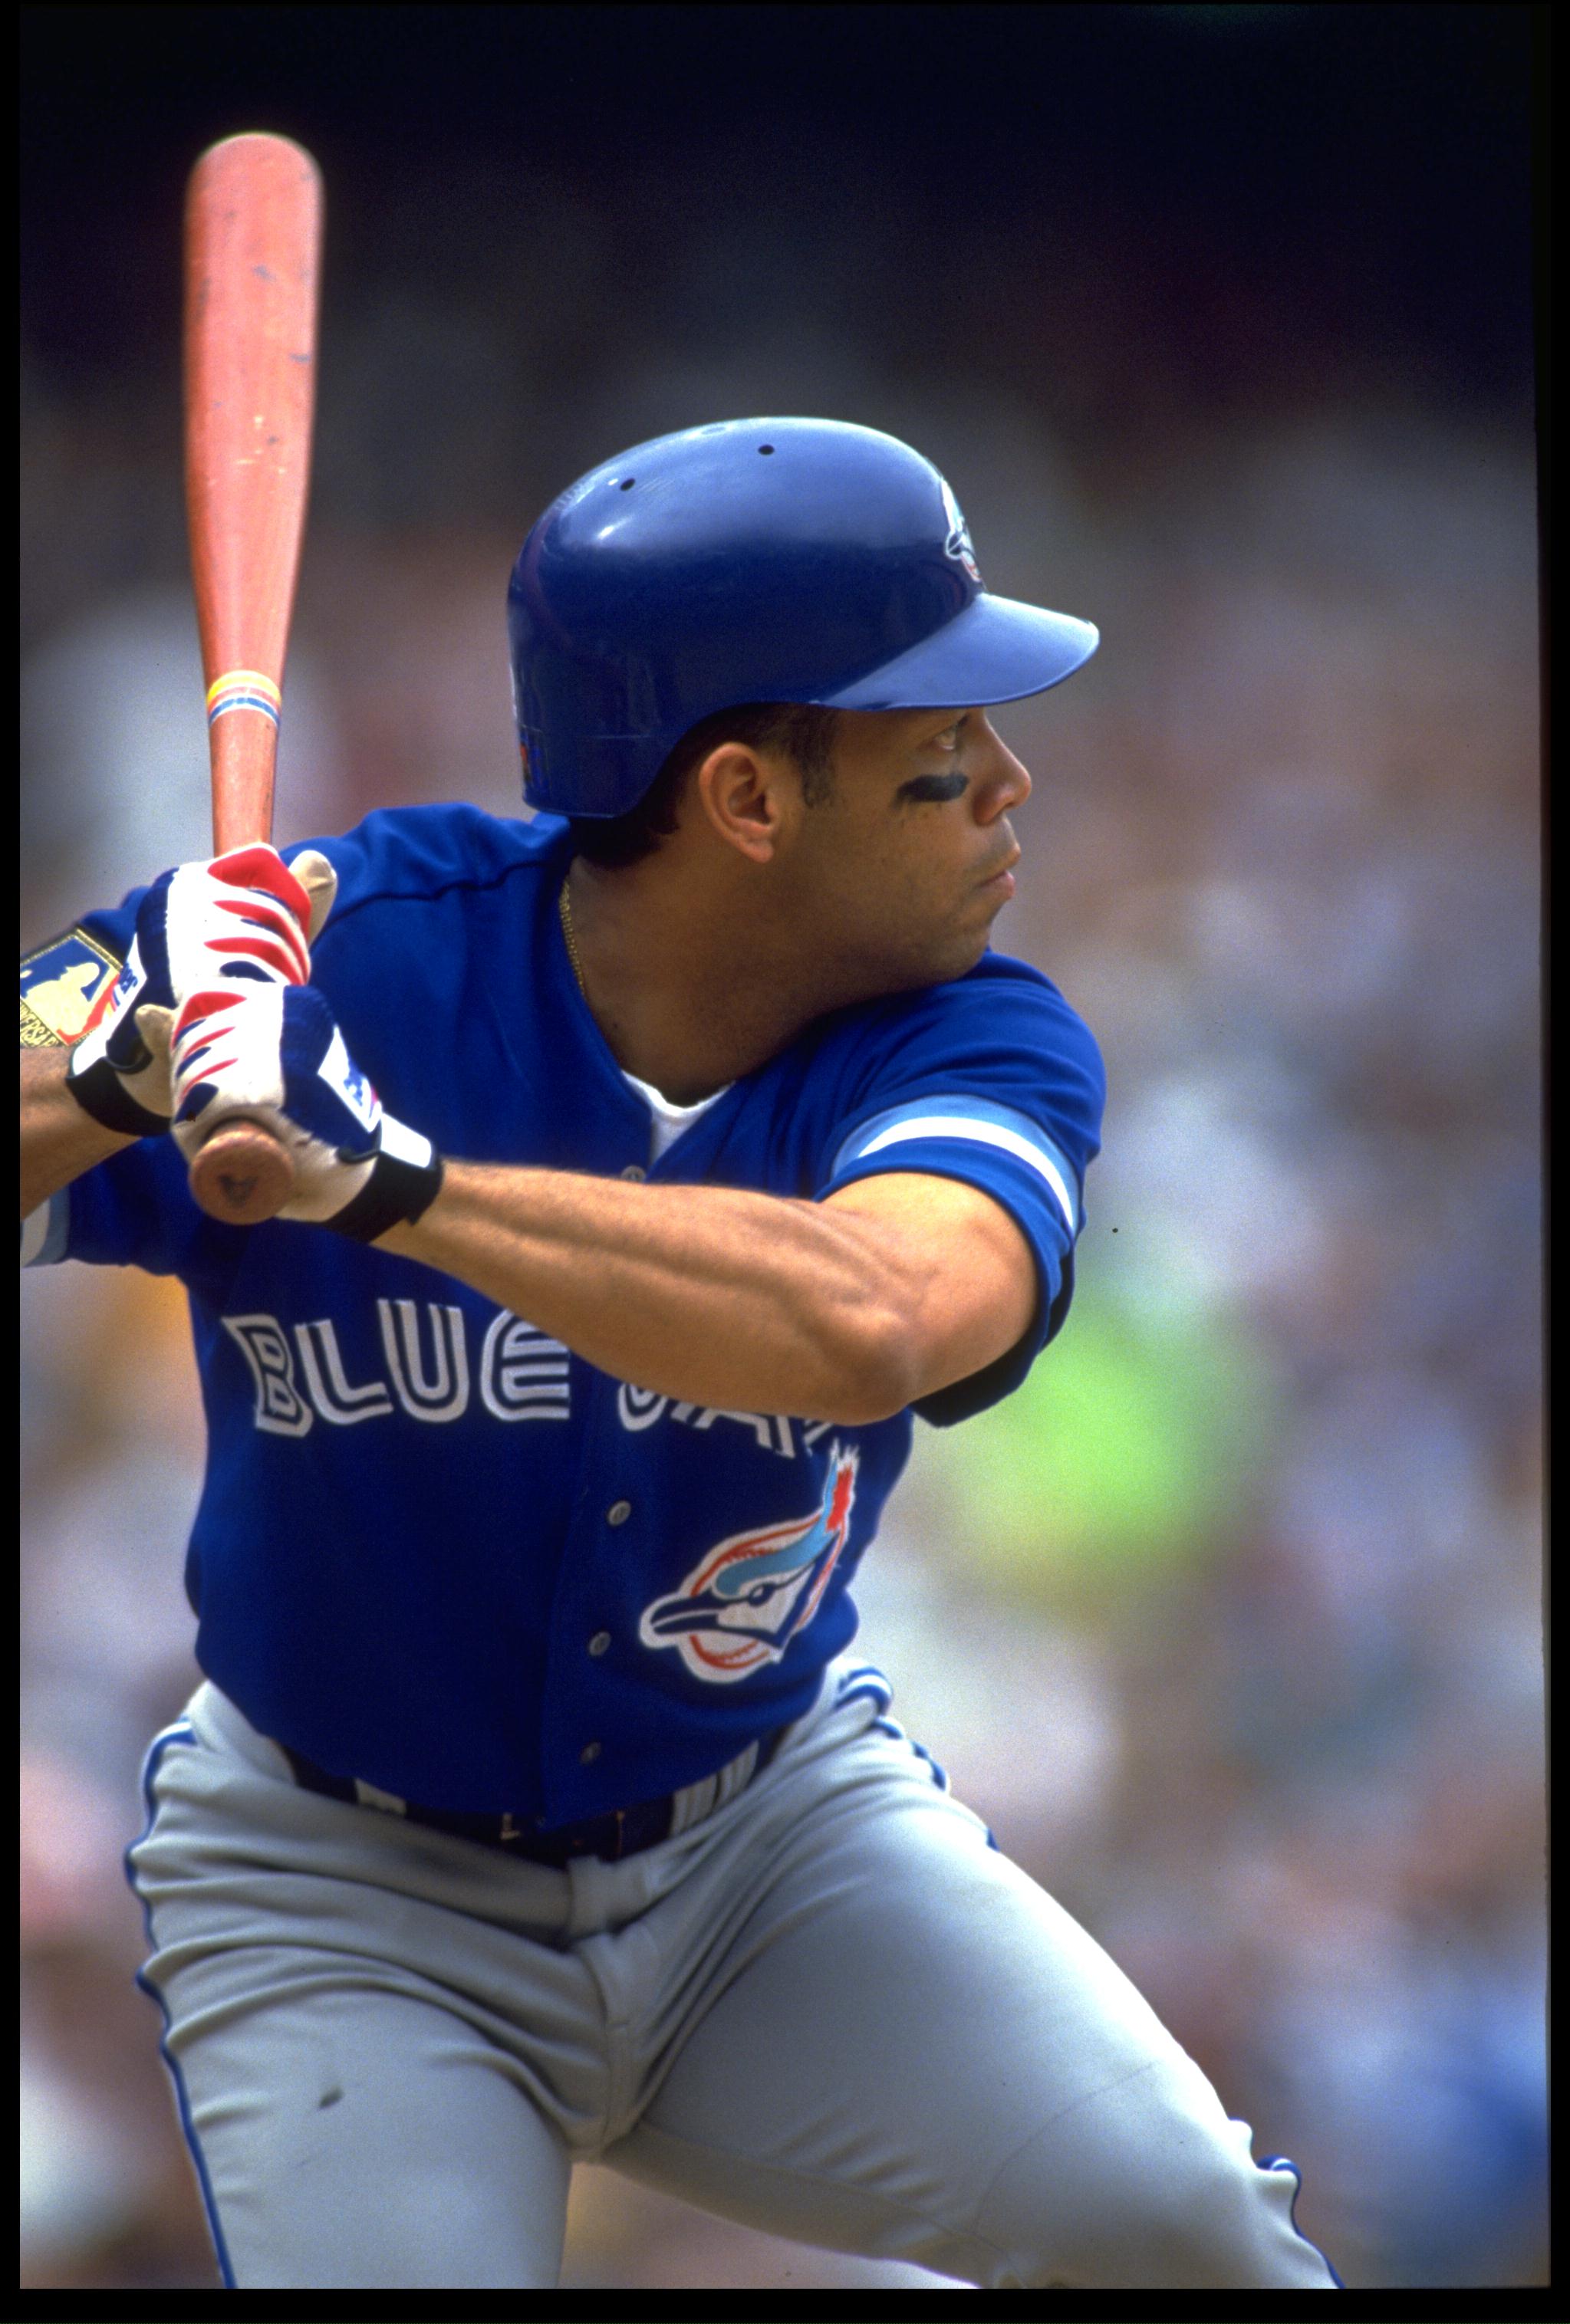 17 Apr 1994: ROBERTO ALOMAR, SECOND BASEMAN FOR THE TORONTO BLUE JAYS, BATS DURING THEIR GAME AGAINST THE CALIFORNIA ANGELS AT ANAHEIM STADIUM IN ANAHEIM, CALIFORNIA.